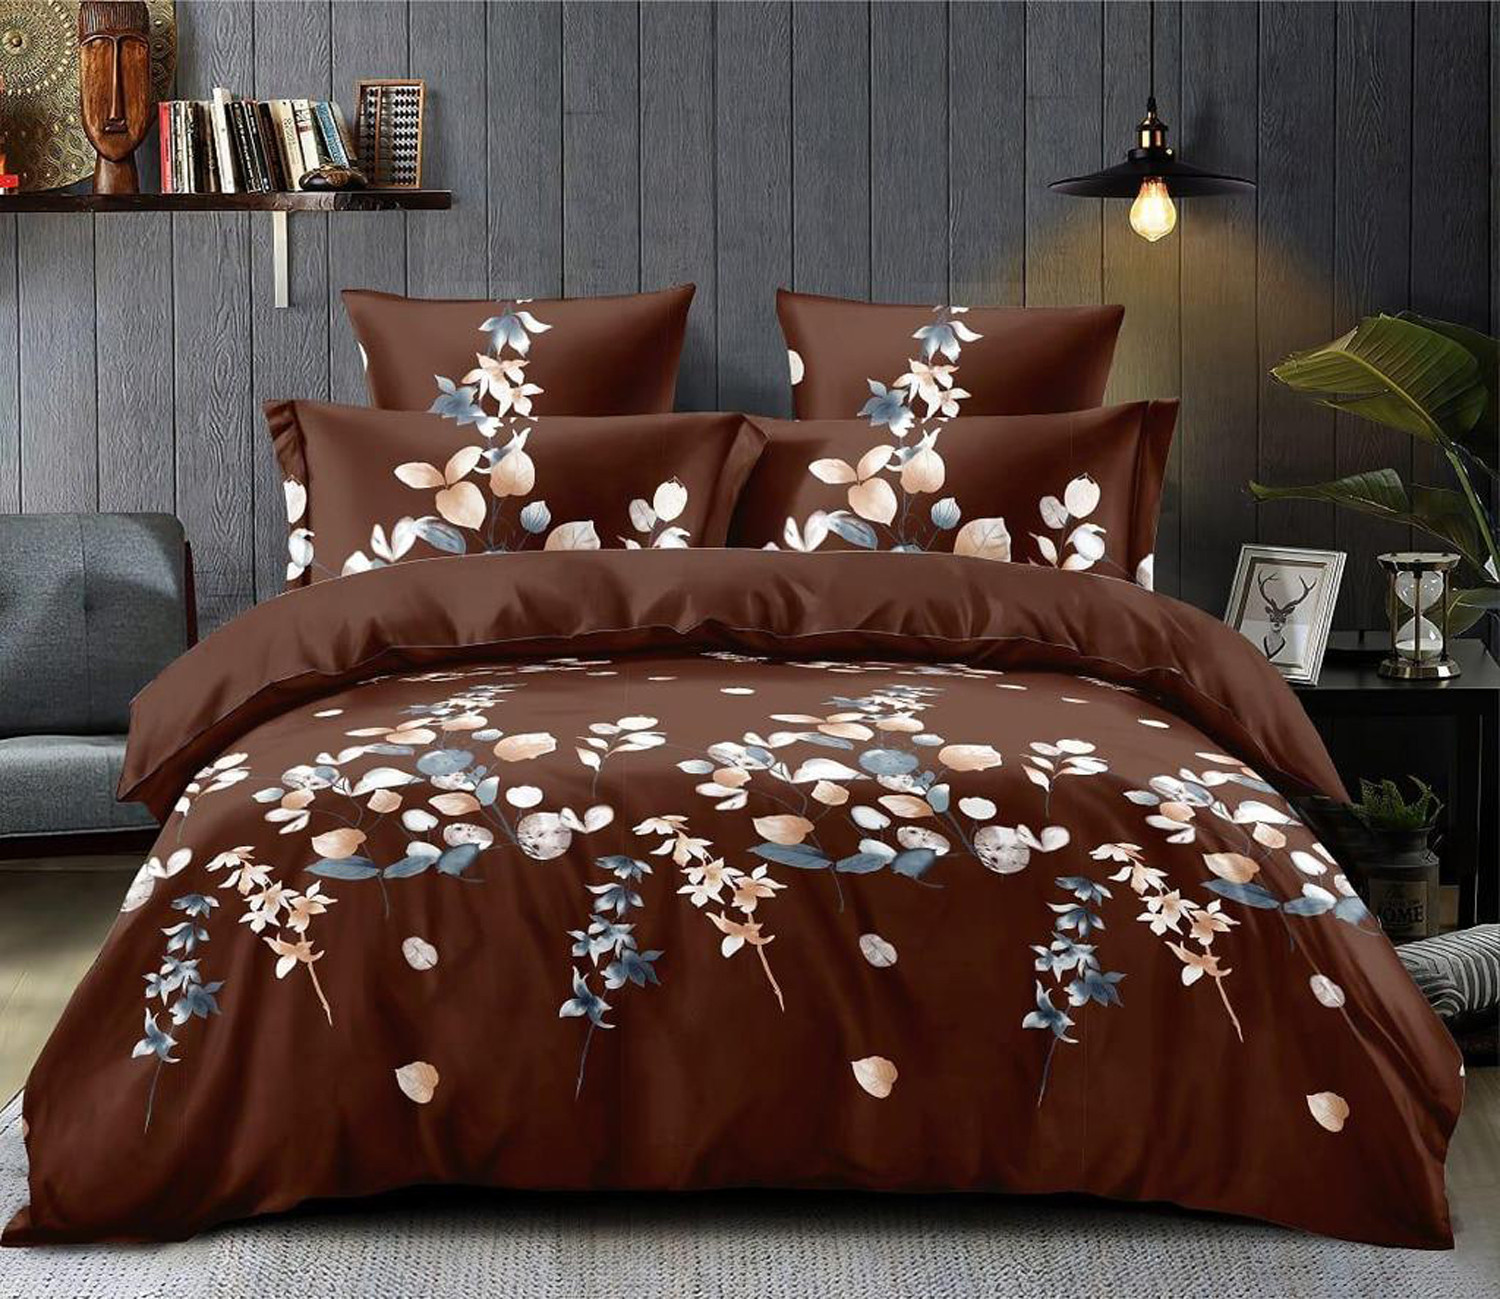 Kuber Industries Flower Print Glace Cotton Double Bedsheet with 2 Pillow Covers (Brown)